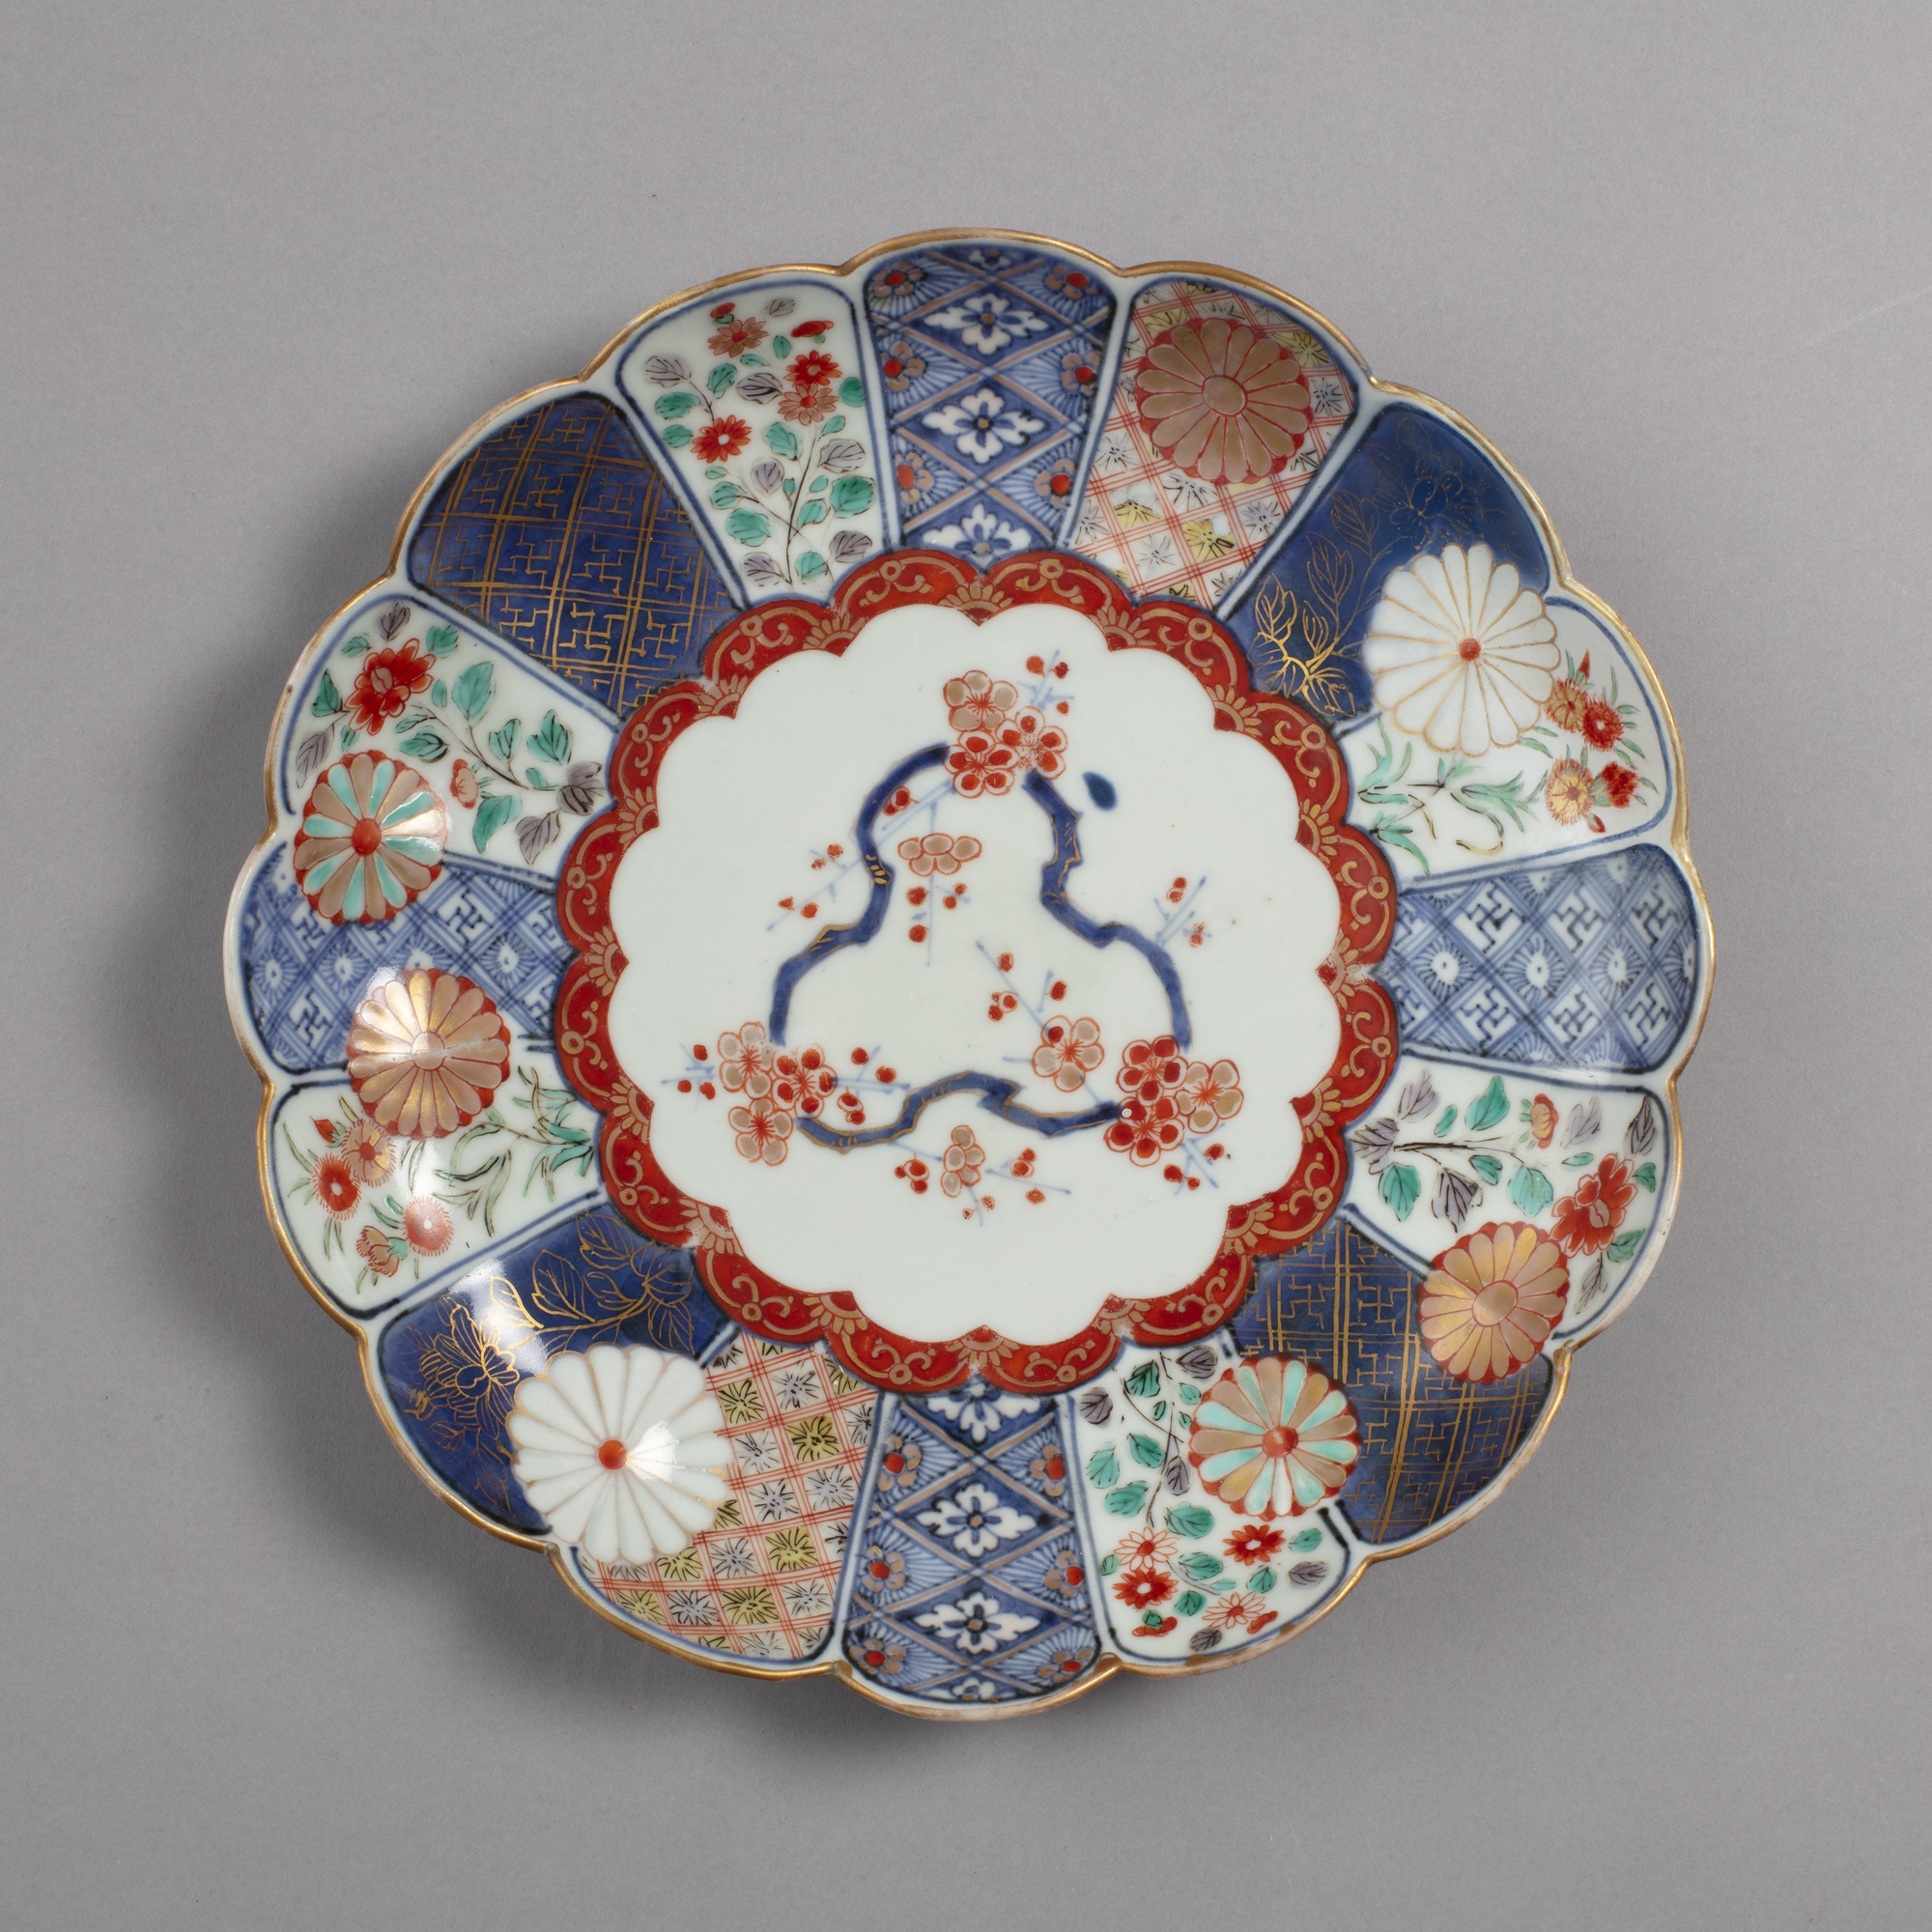 Dish with design of chrysanthemums and plum blossoms in blue, red and green